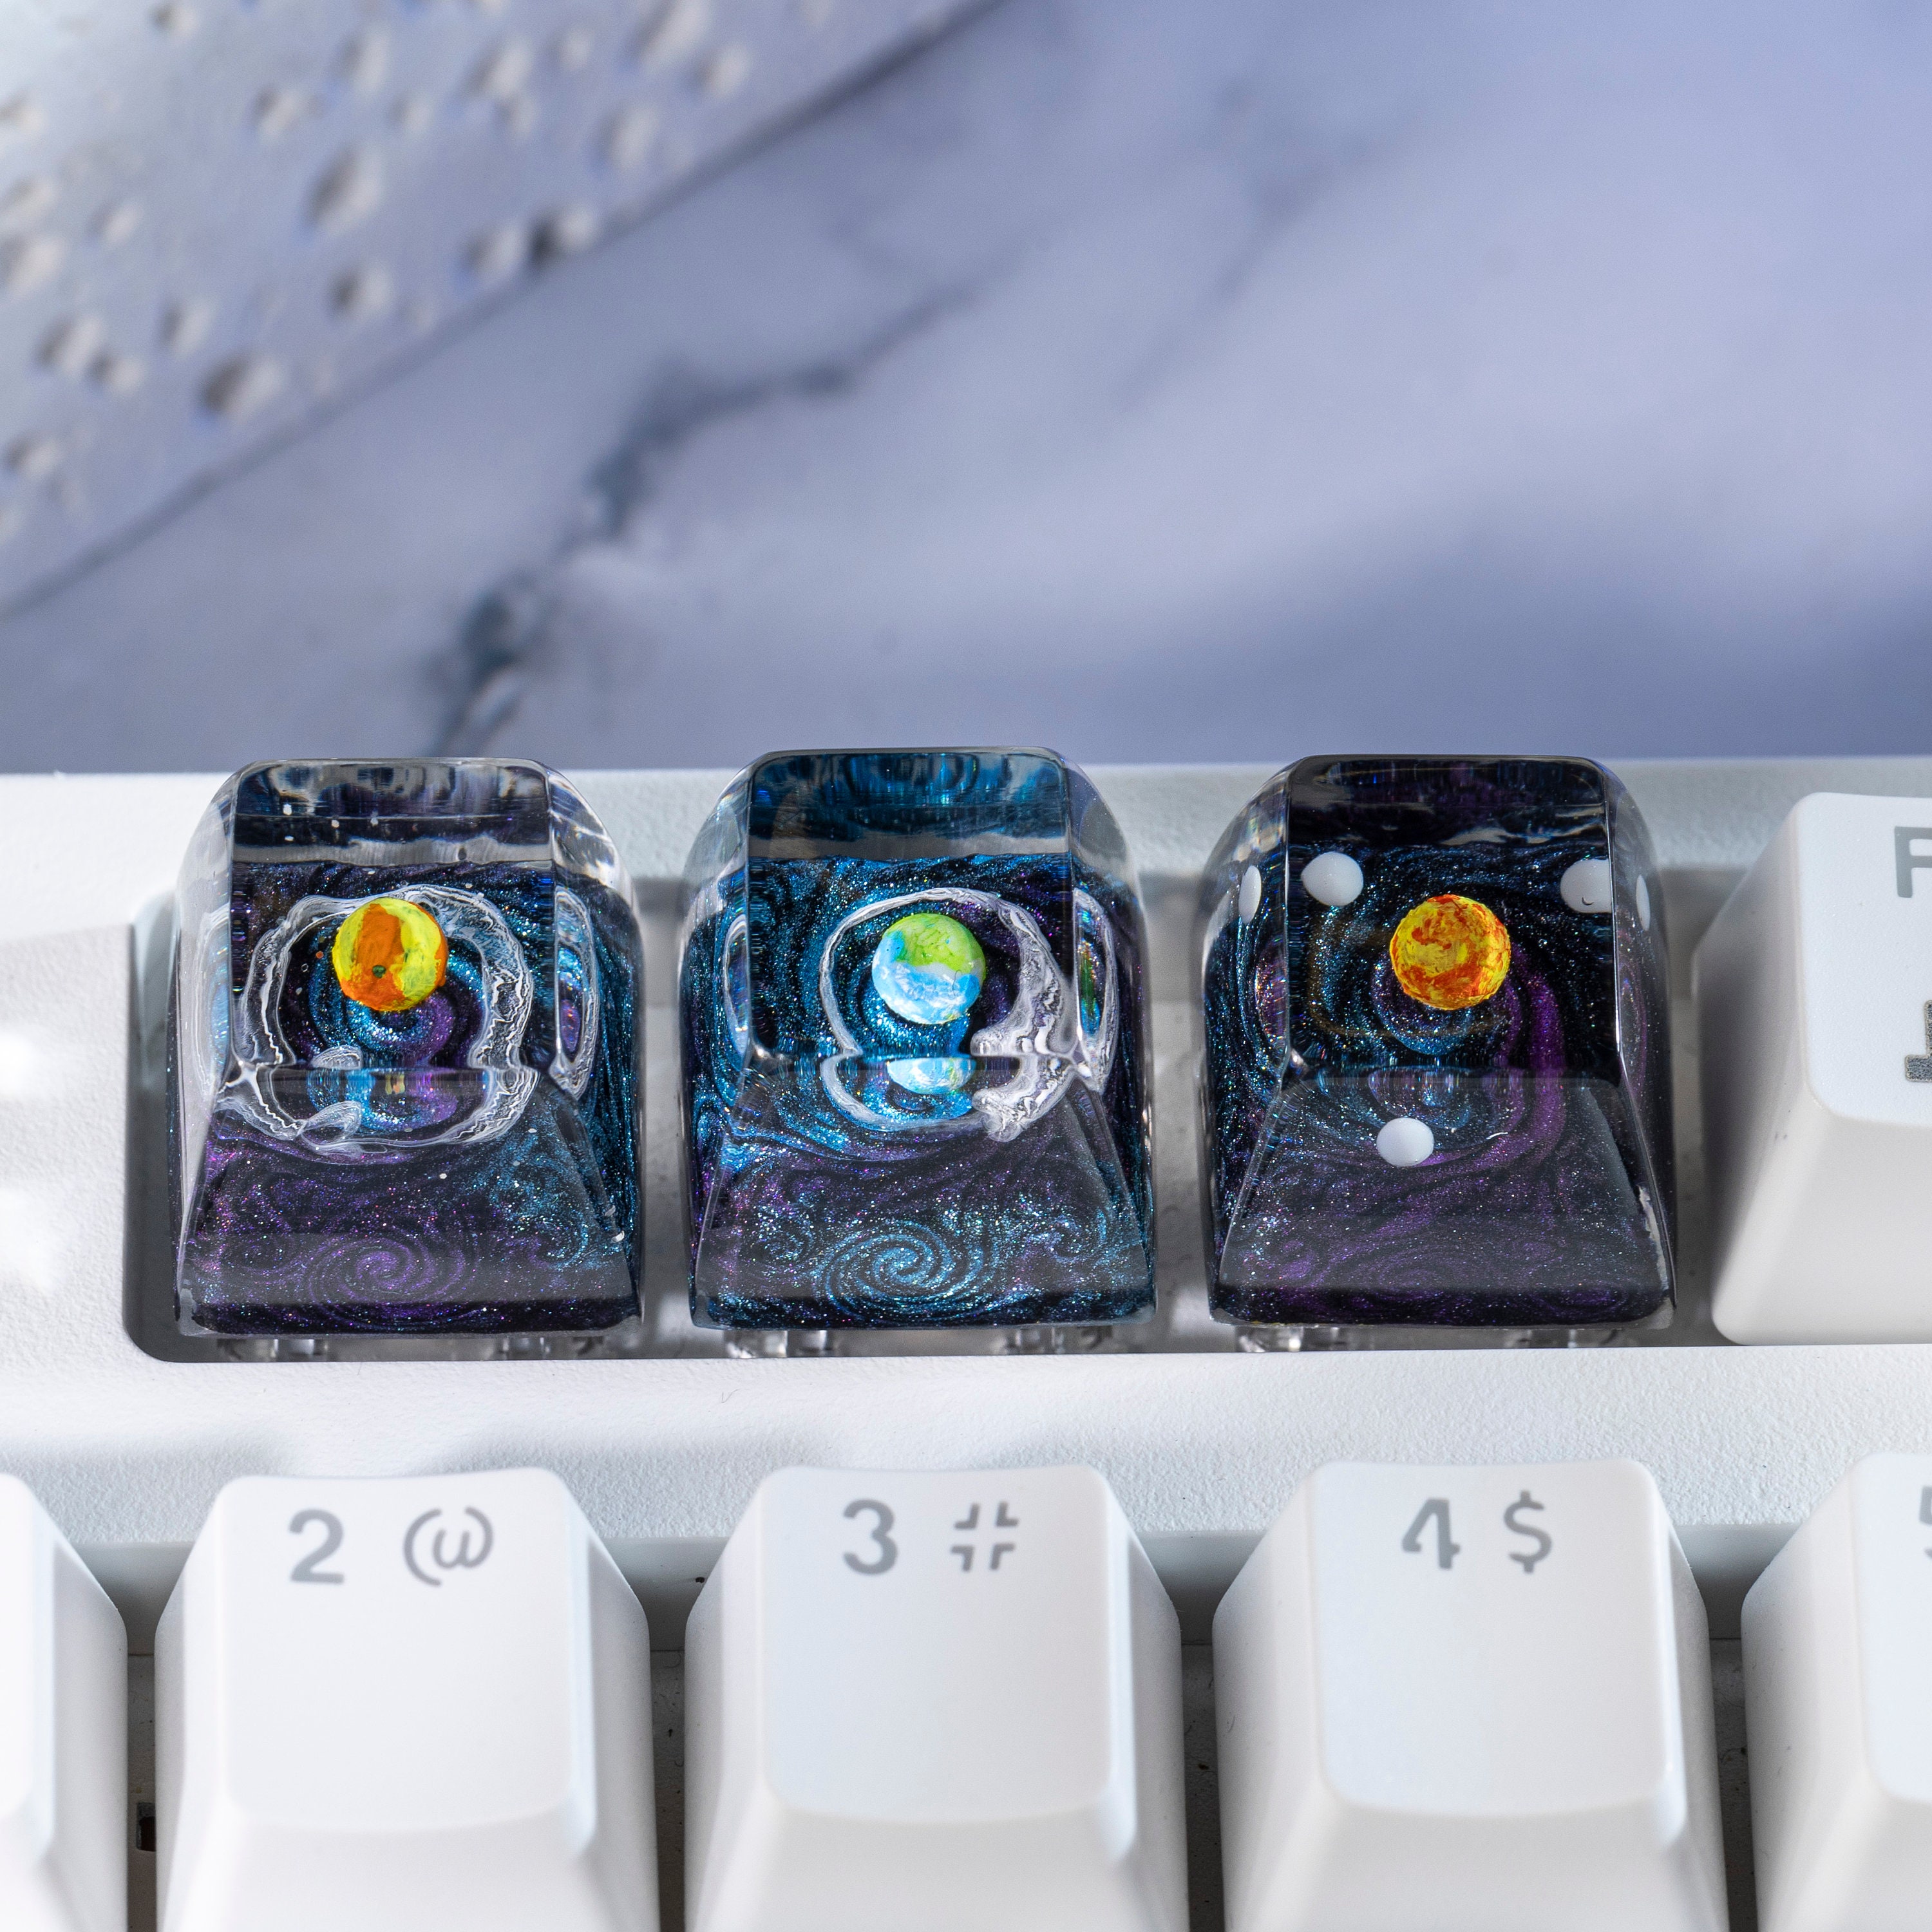 Planets Keycap Set, Solar System Keycap, Universe Keycap, Artisan Keycacp, Keycap for Cherry MX Switches Michanical Keyboard, Gift for Him